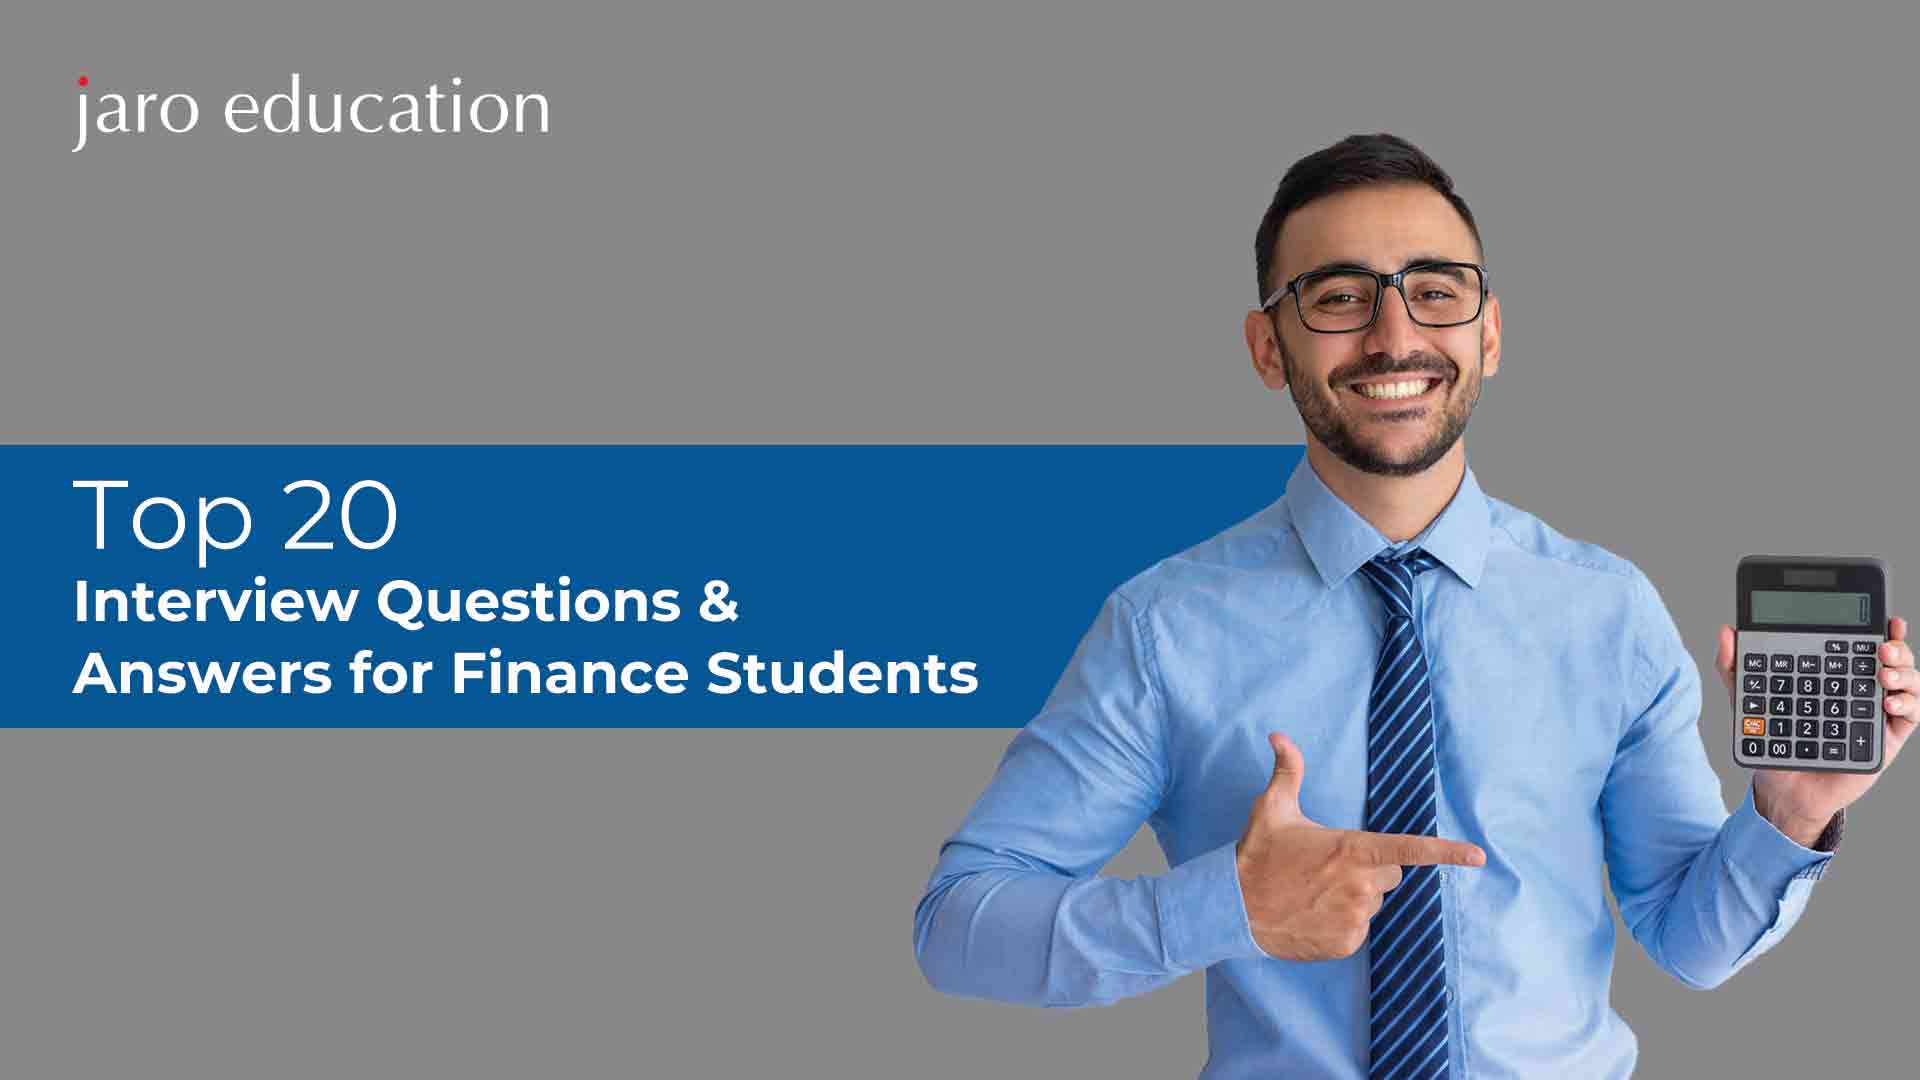 Top 20 Interview Questions & Answers for Finance Students